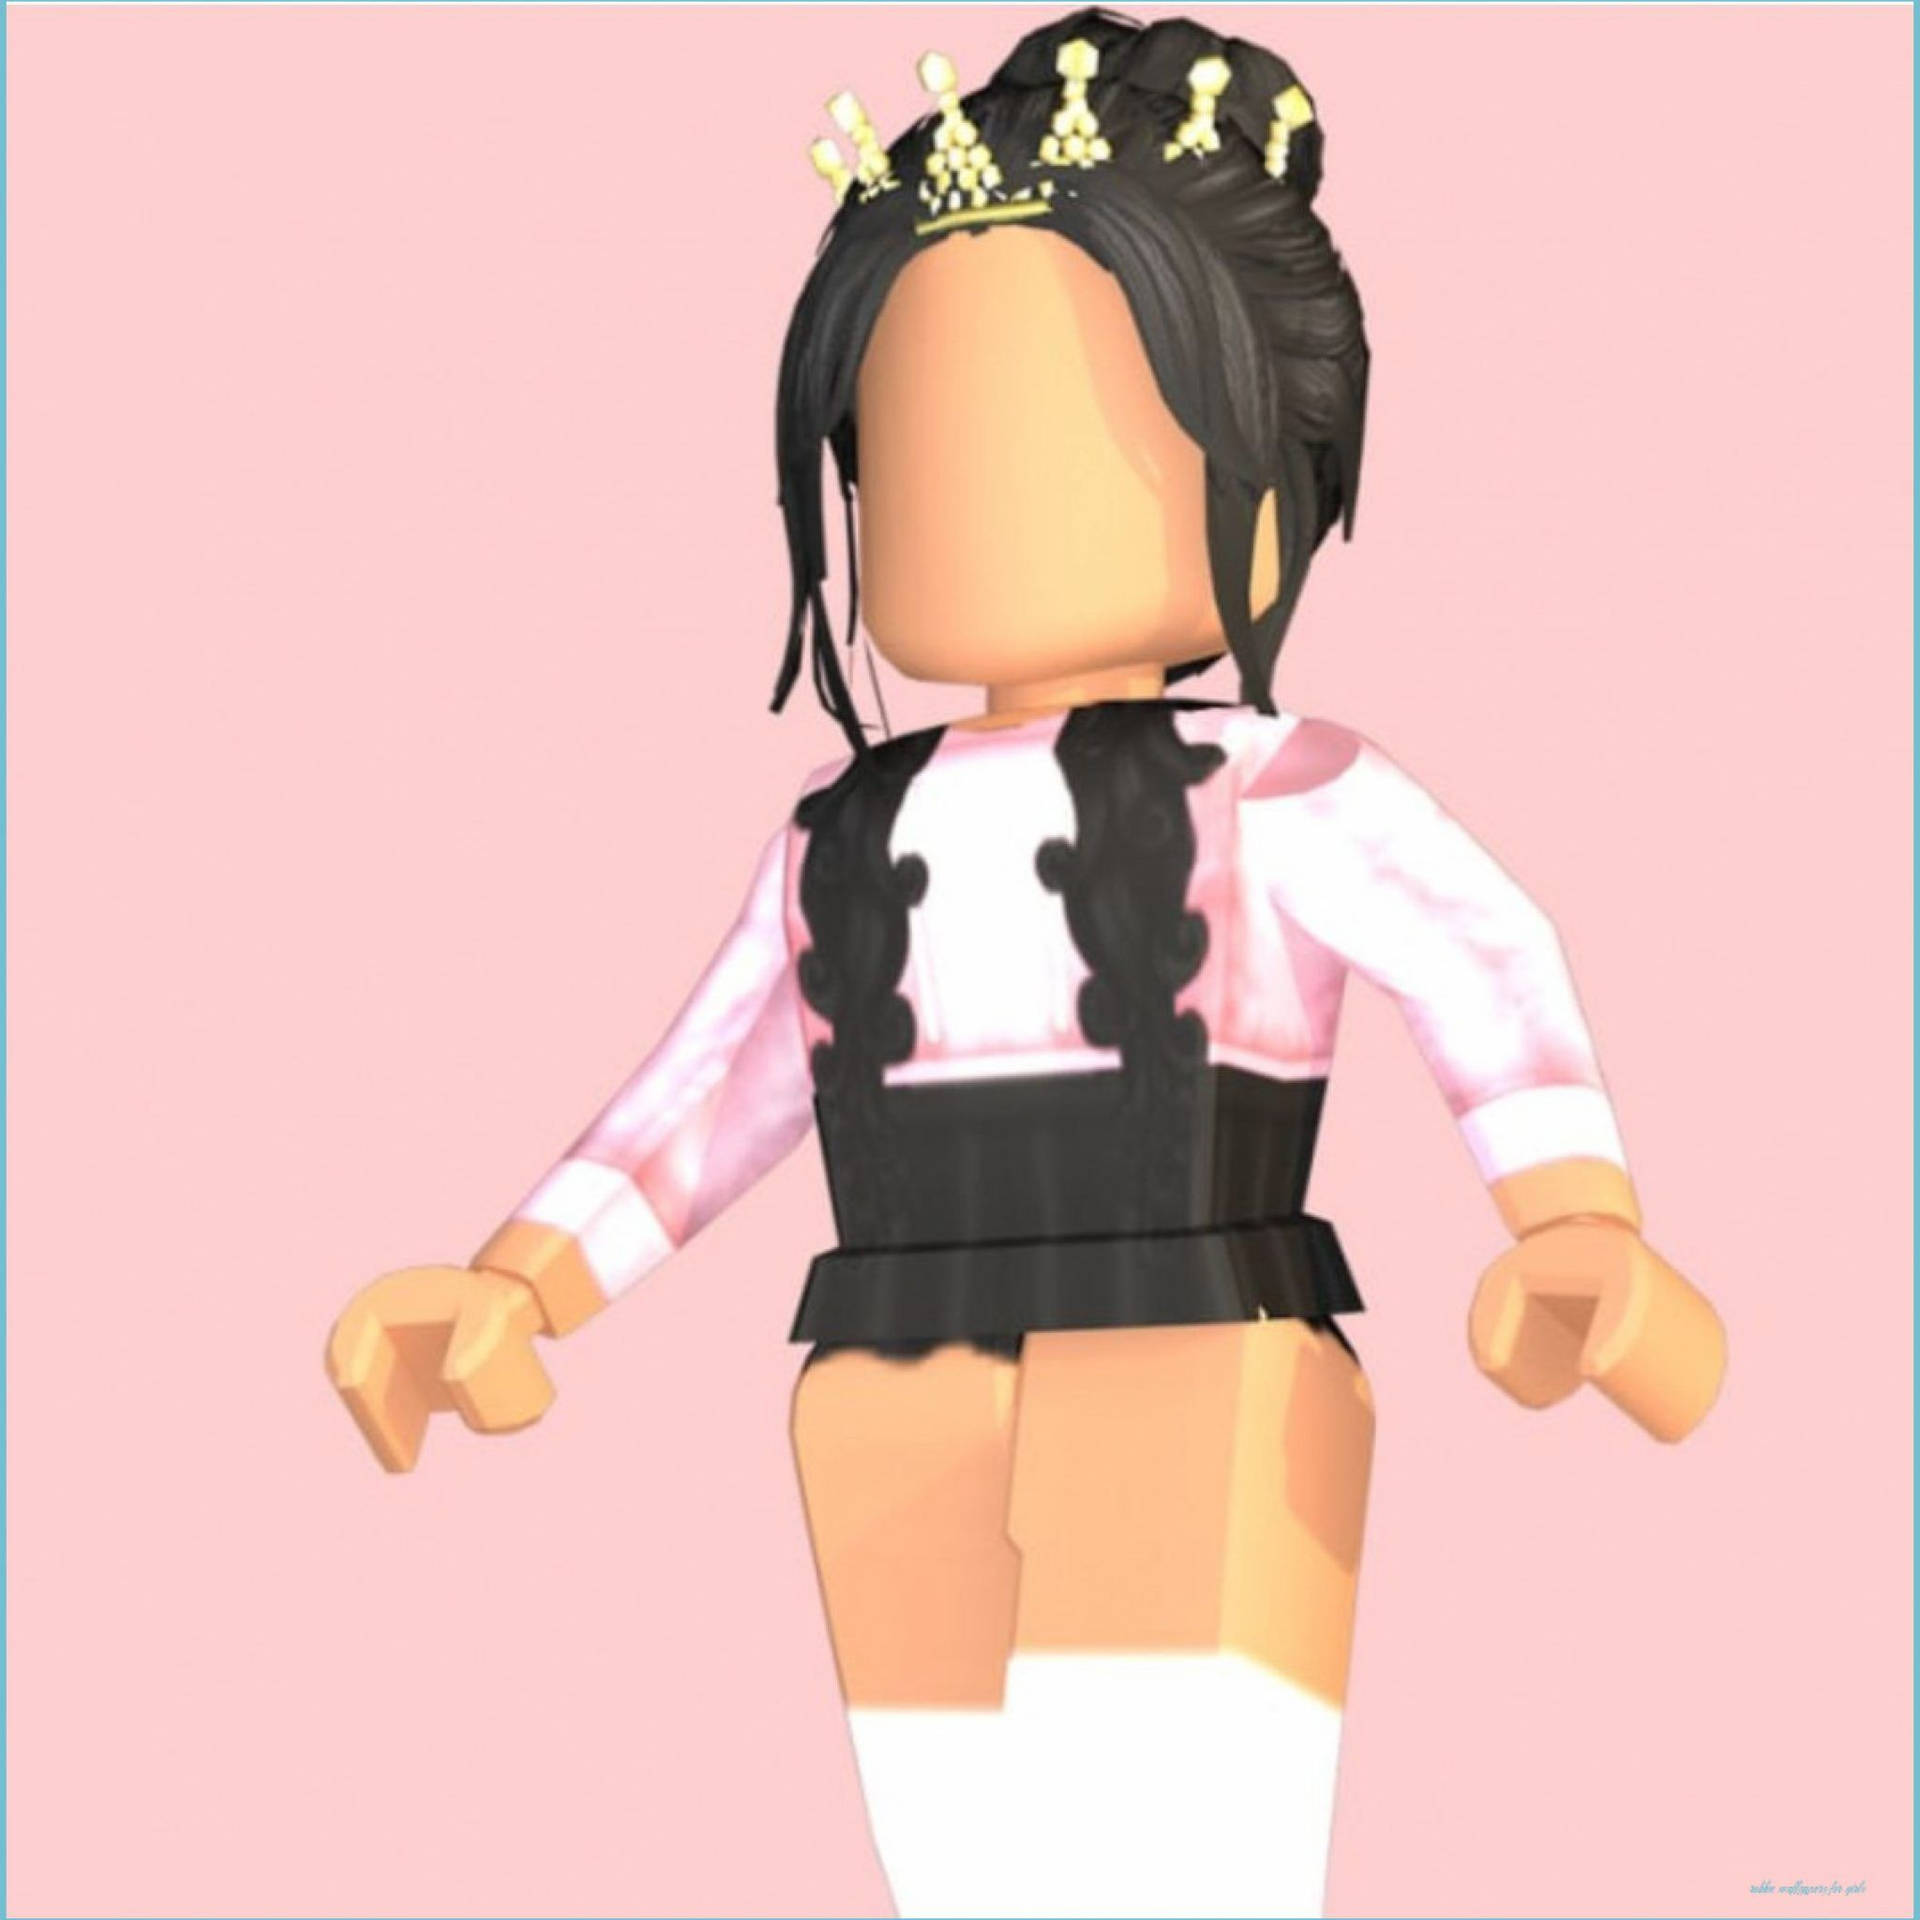 Cute Roblox With Black And Pink Outfit